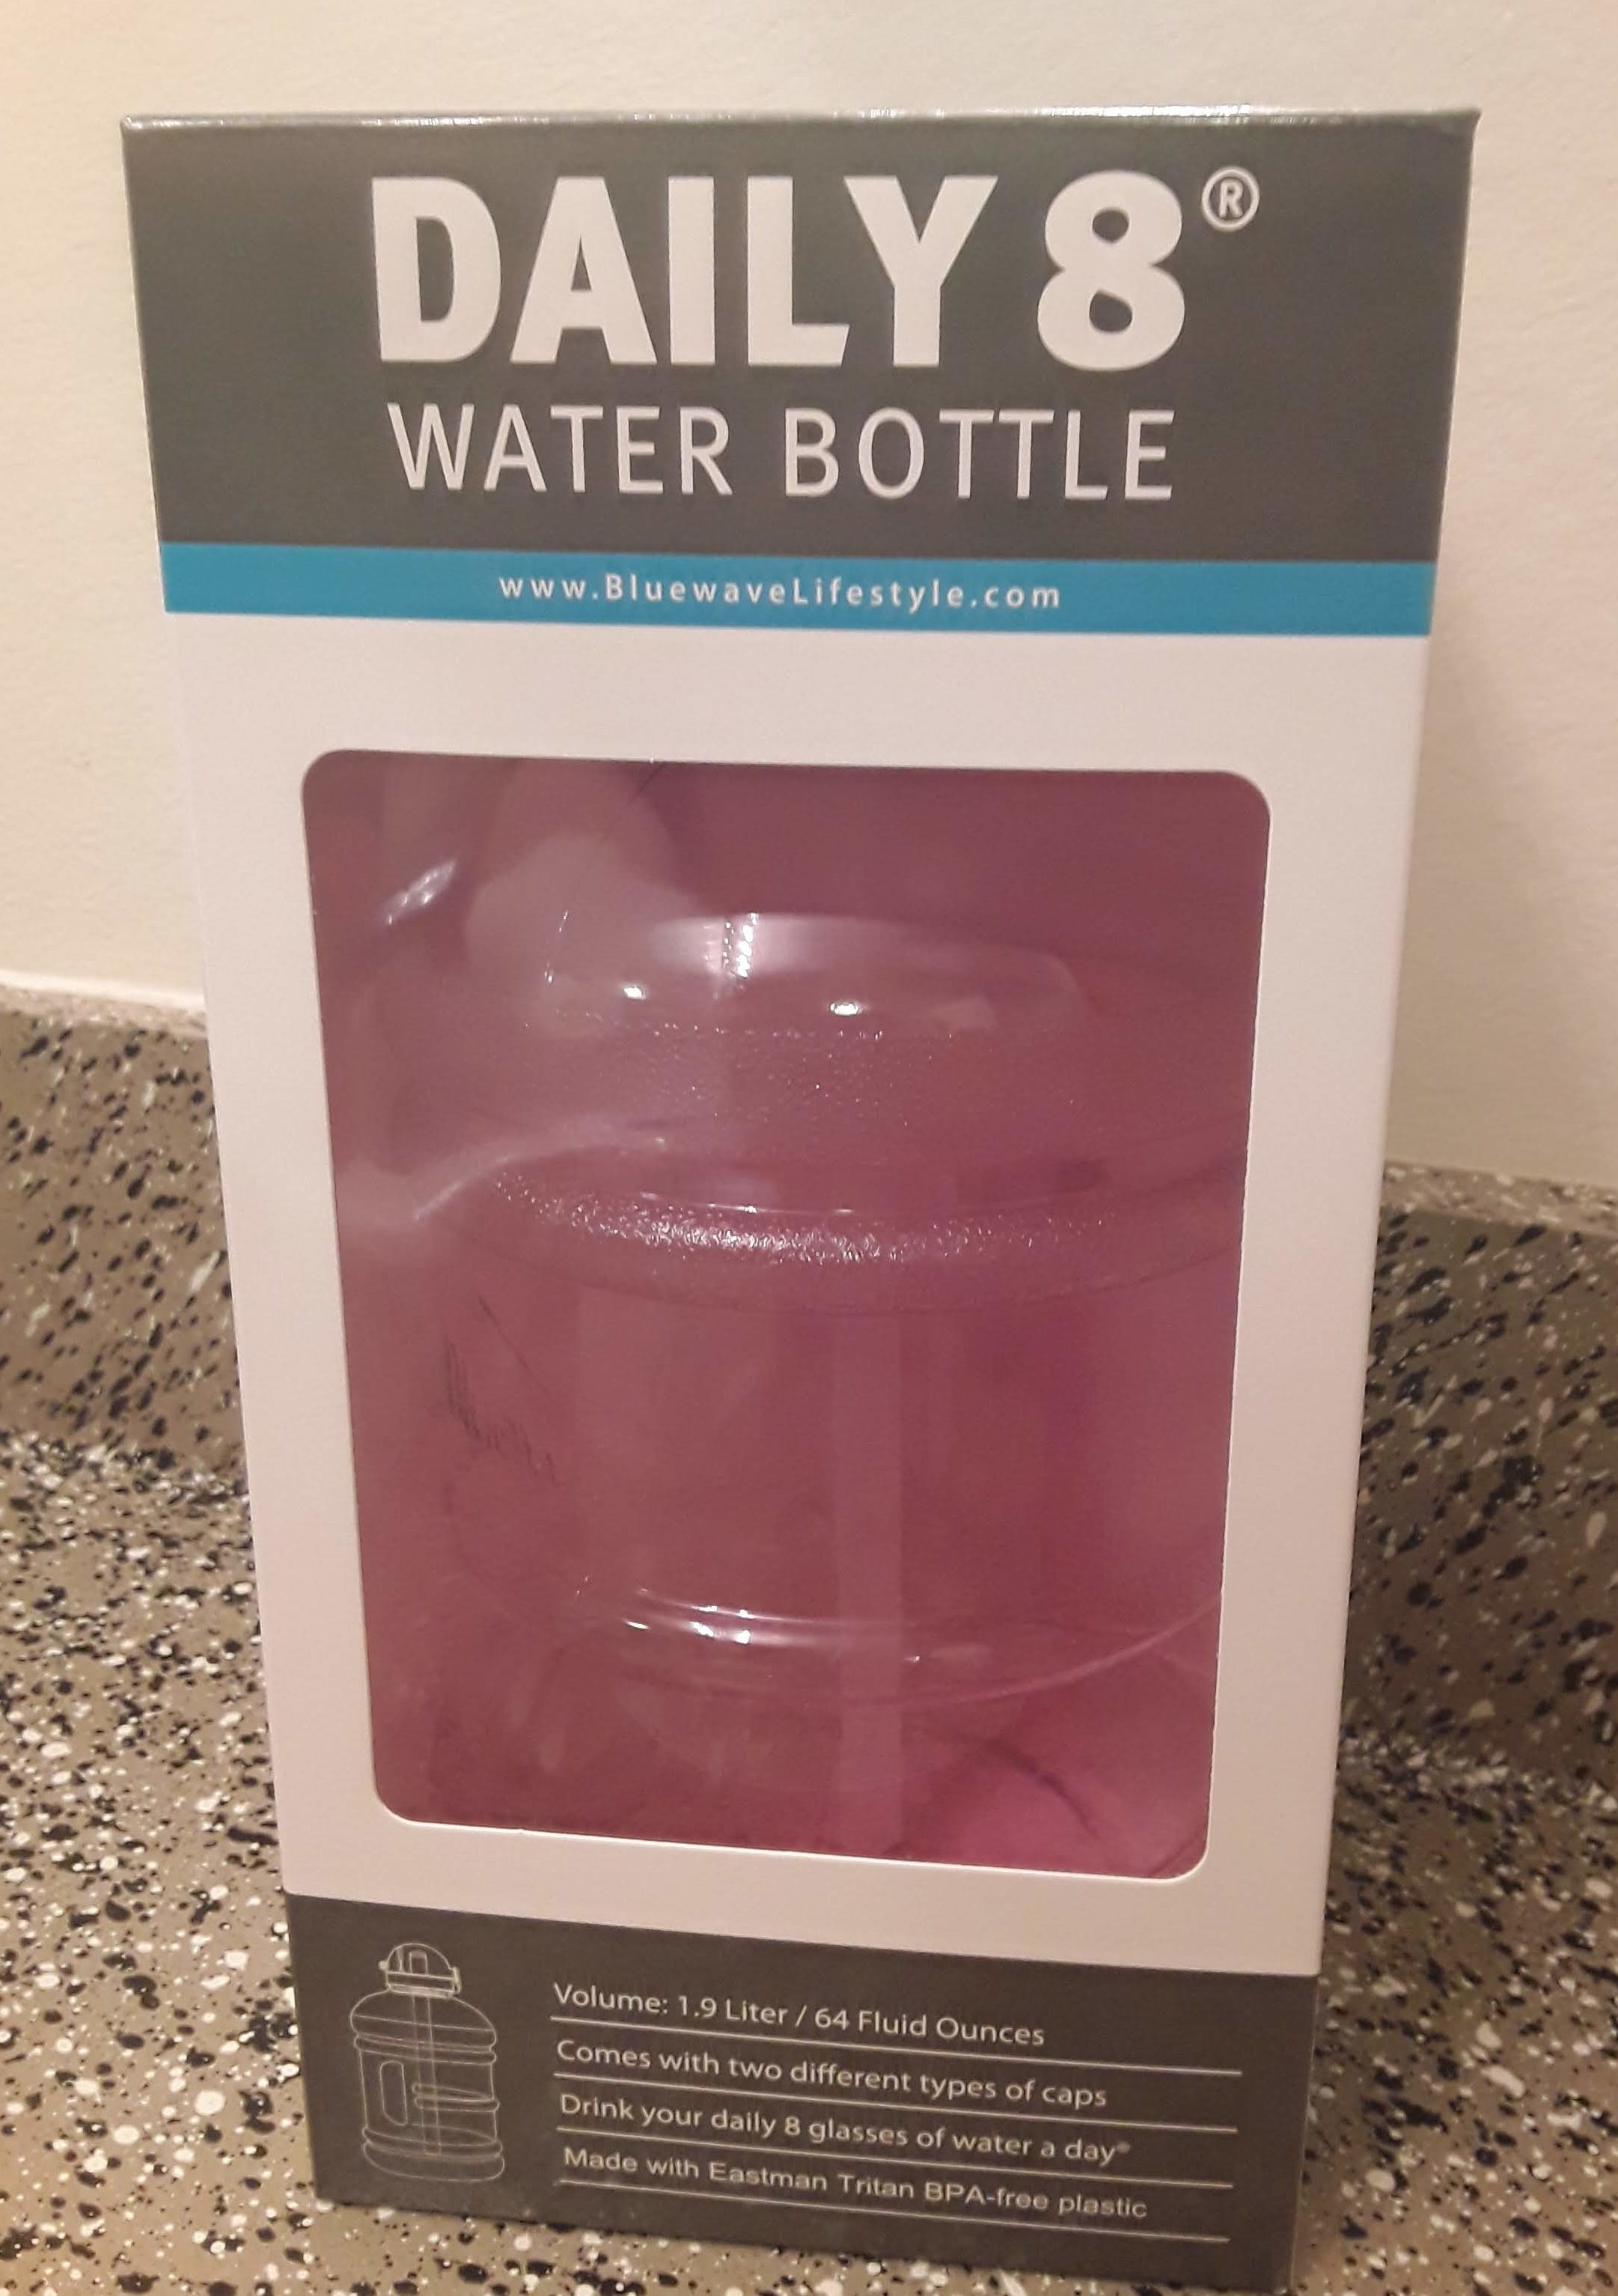 Bluewave Lifestyle Daily 8 Water Bottle